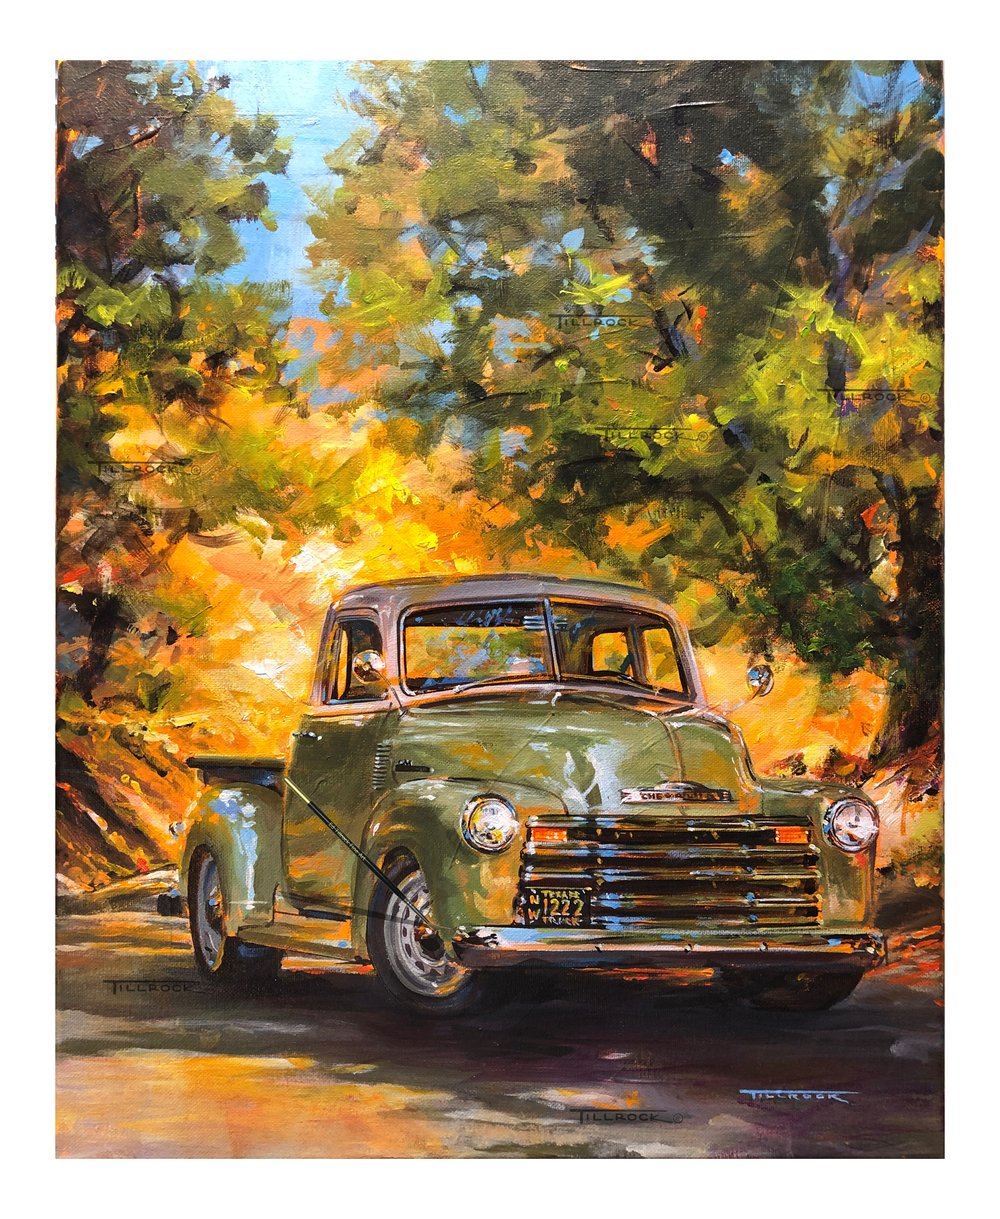 Image of "Olive" 1950 Chevy Thriftmaster  13x19 Print